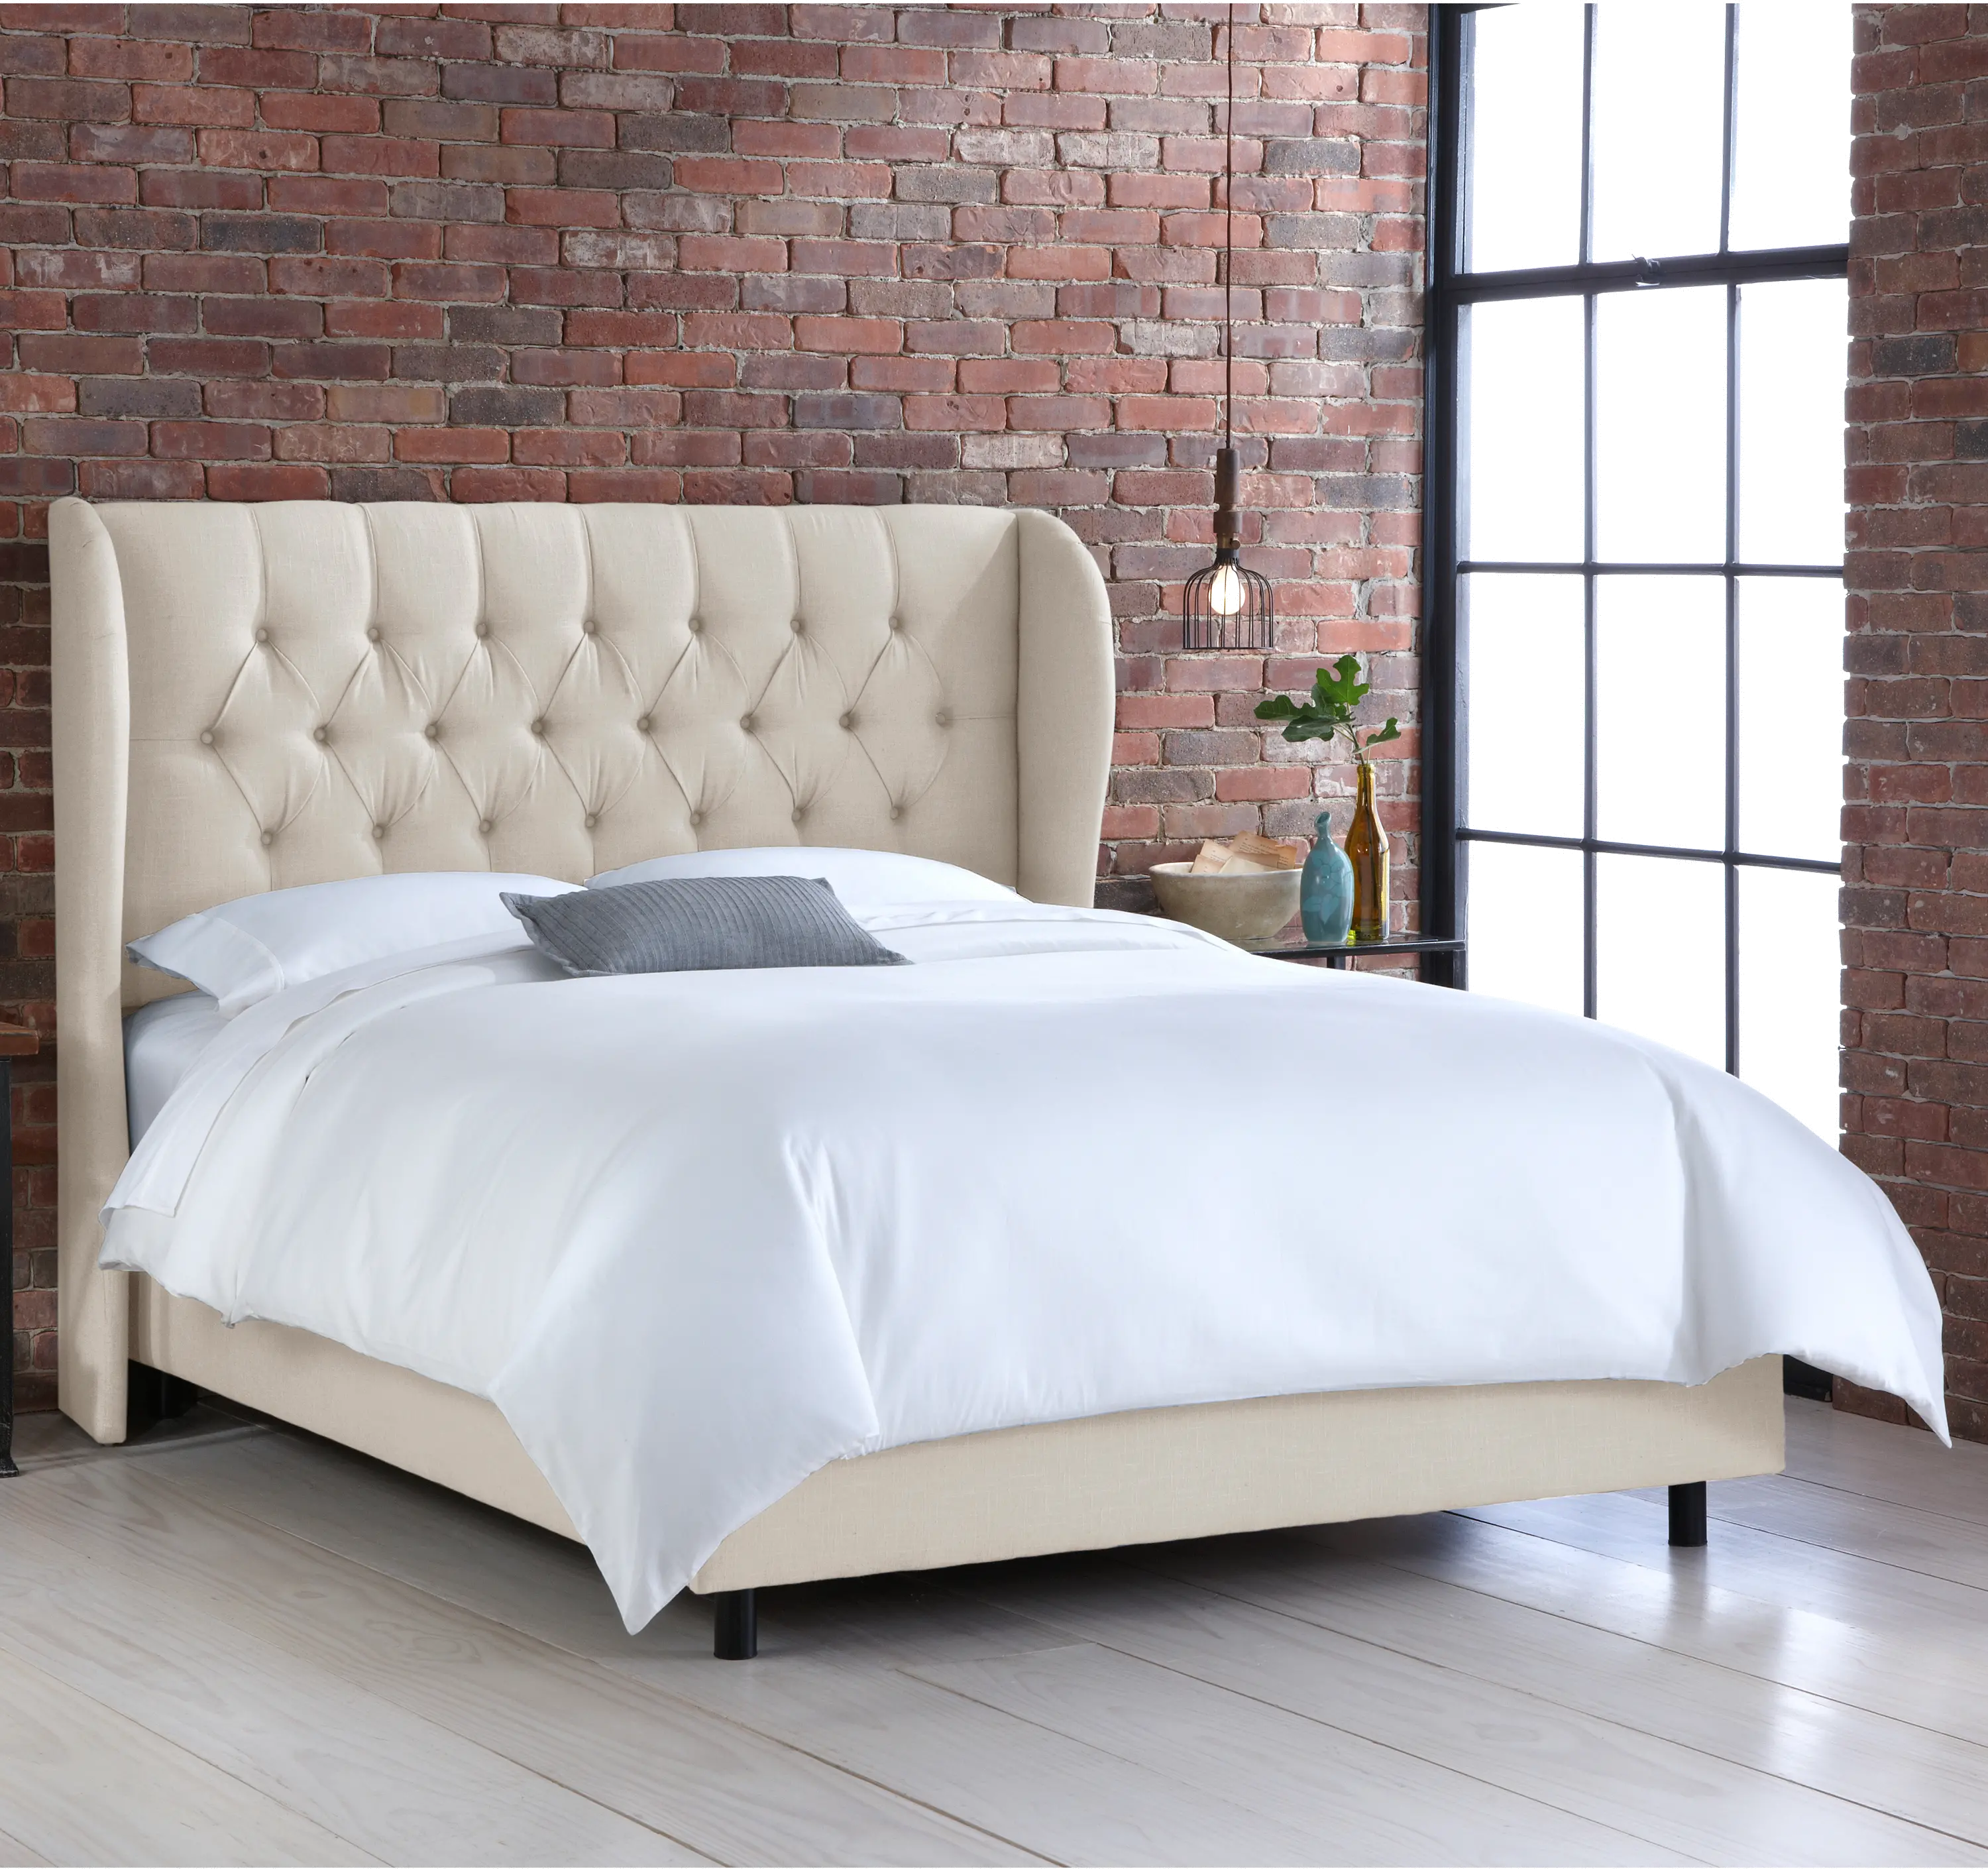 Izzy Cream Sloped Wingback Queen Bed - Skyline Furniture